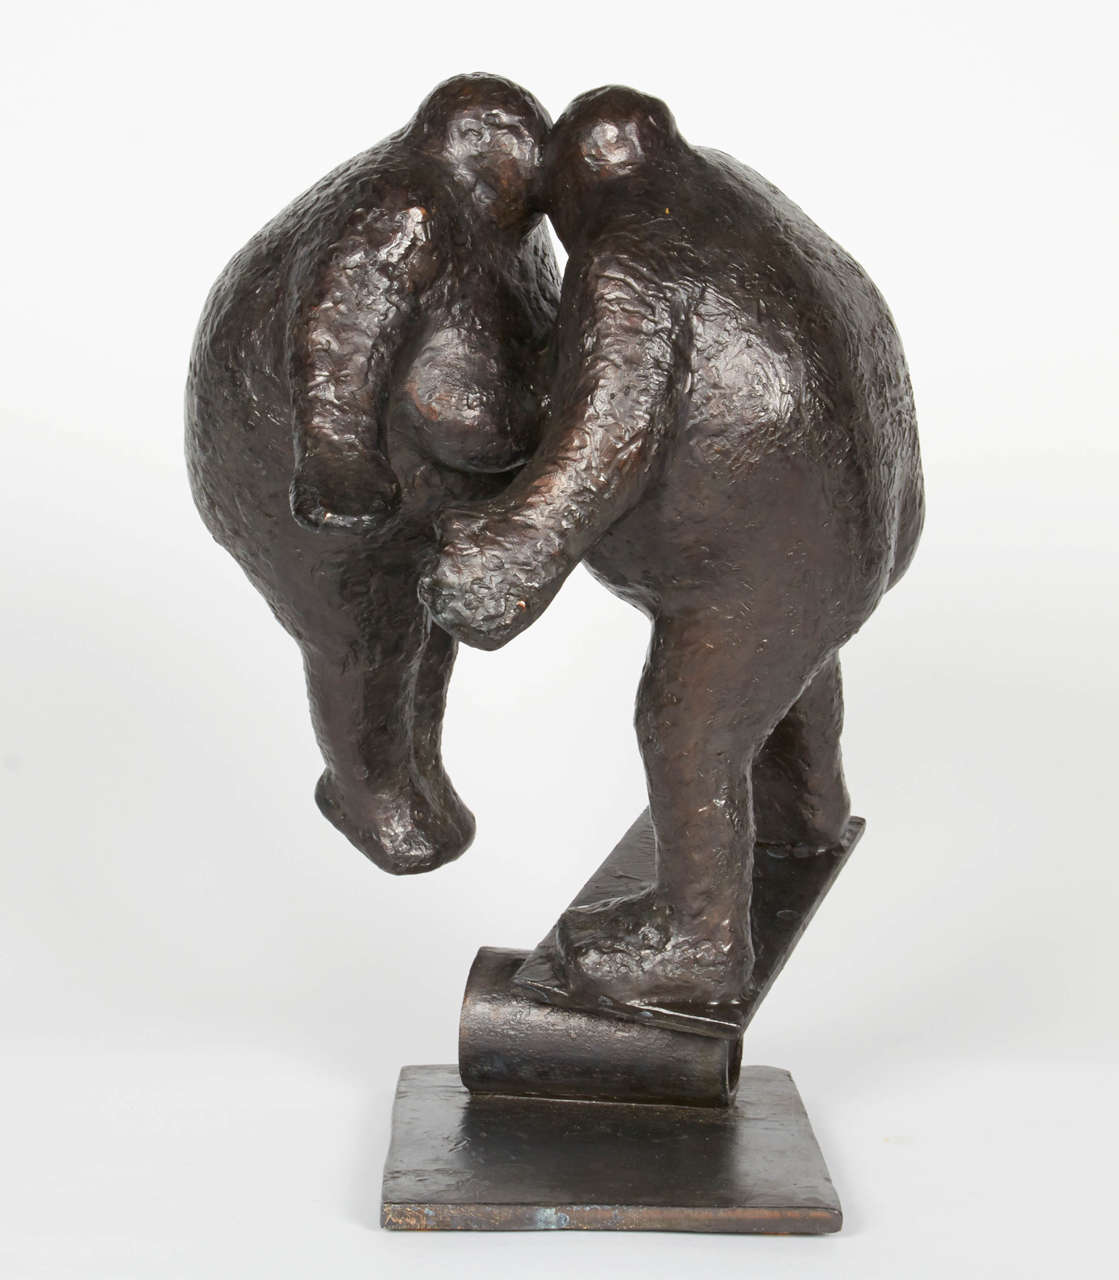 Seemingly comical and humorous, the works of Keld Moseholm (b. 1936) are steeped with a satirical comment on human conditions, especially the struggles. In this romantic and yet melancholic work, the kissing couple is standing on a wobbly balance